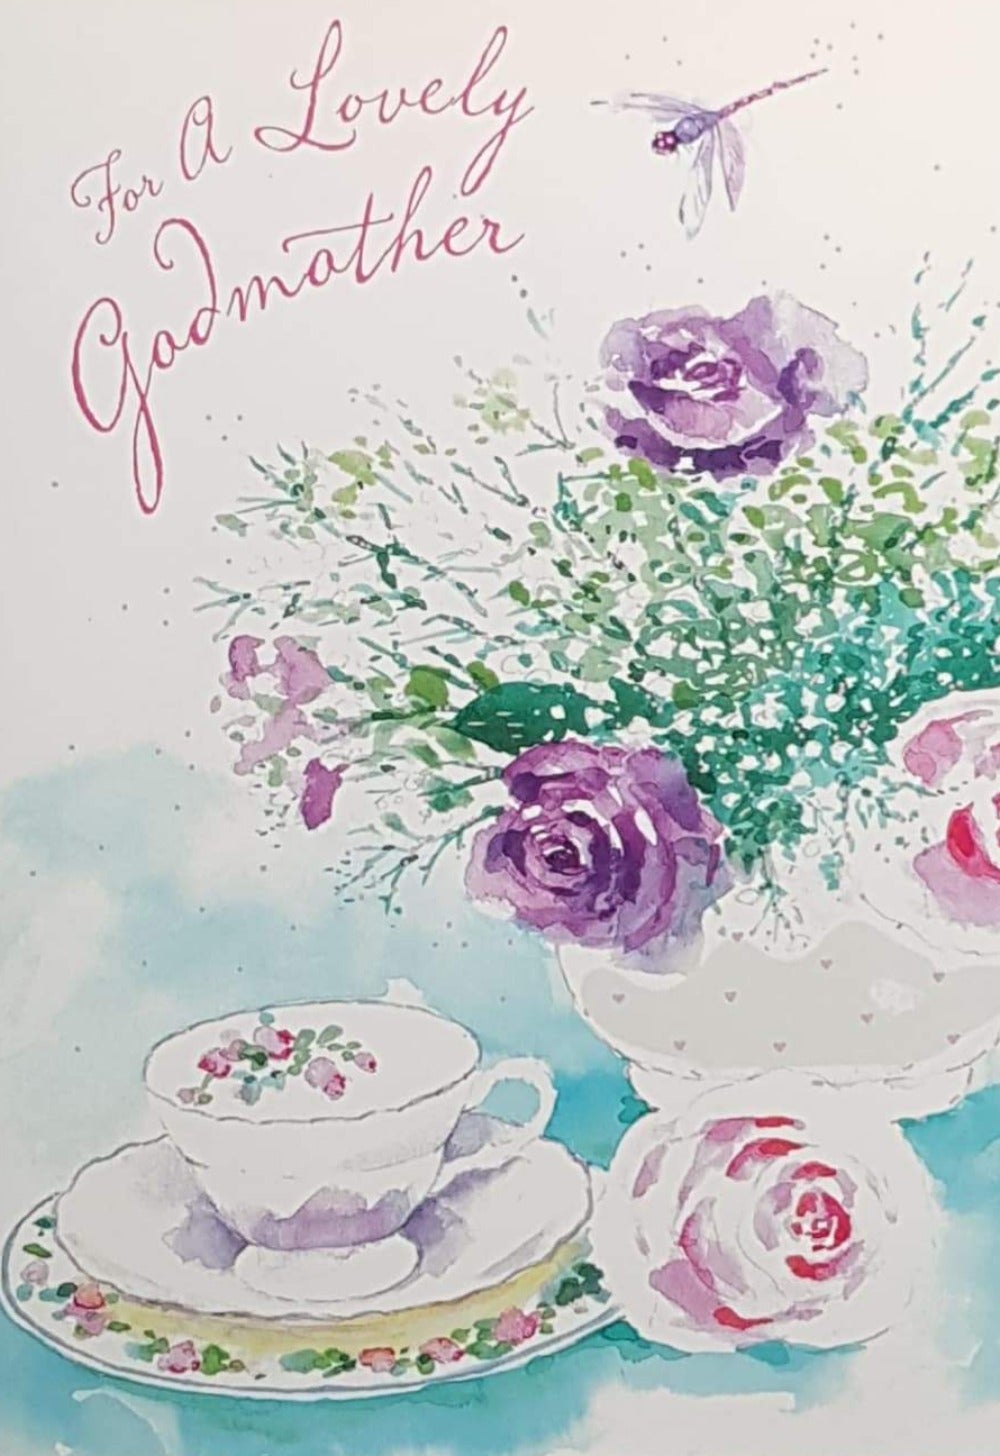 Birthday Card - Godmother / Cup Of Tea & Purple Dragonfly